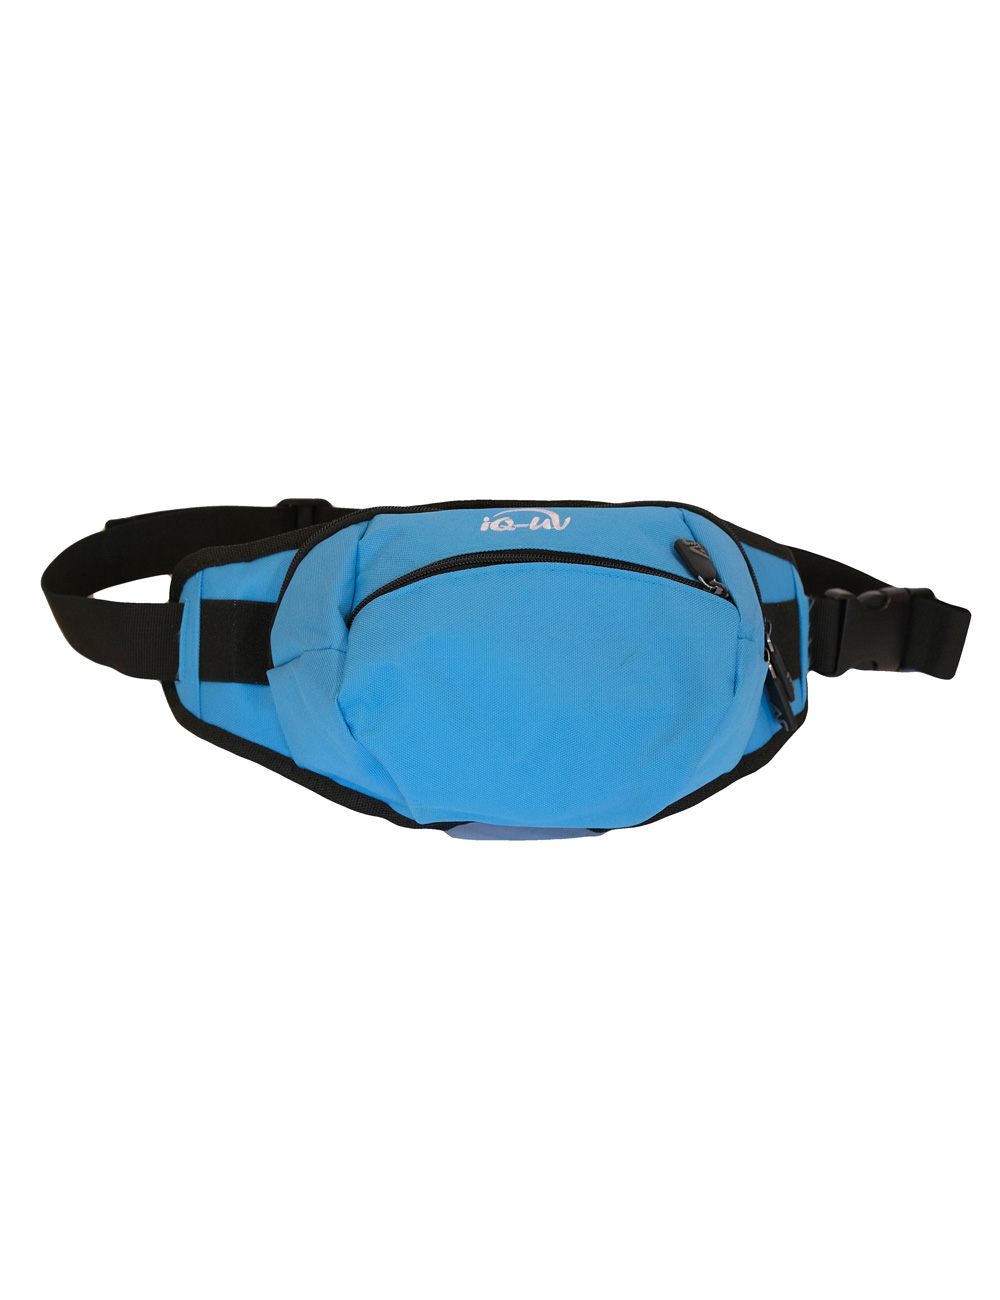 Hip bag for hiking and cycling